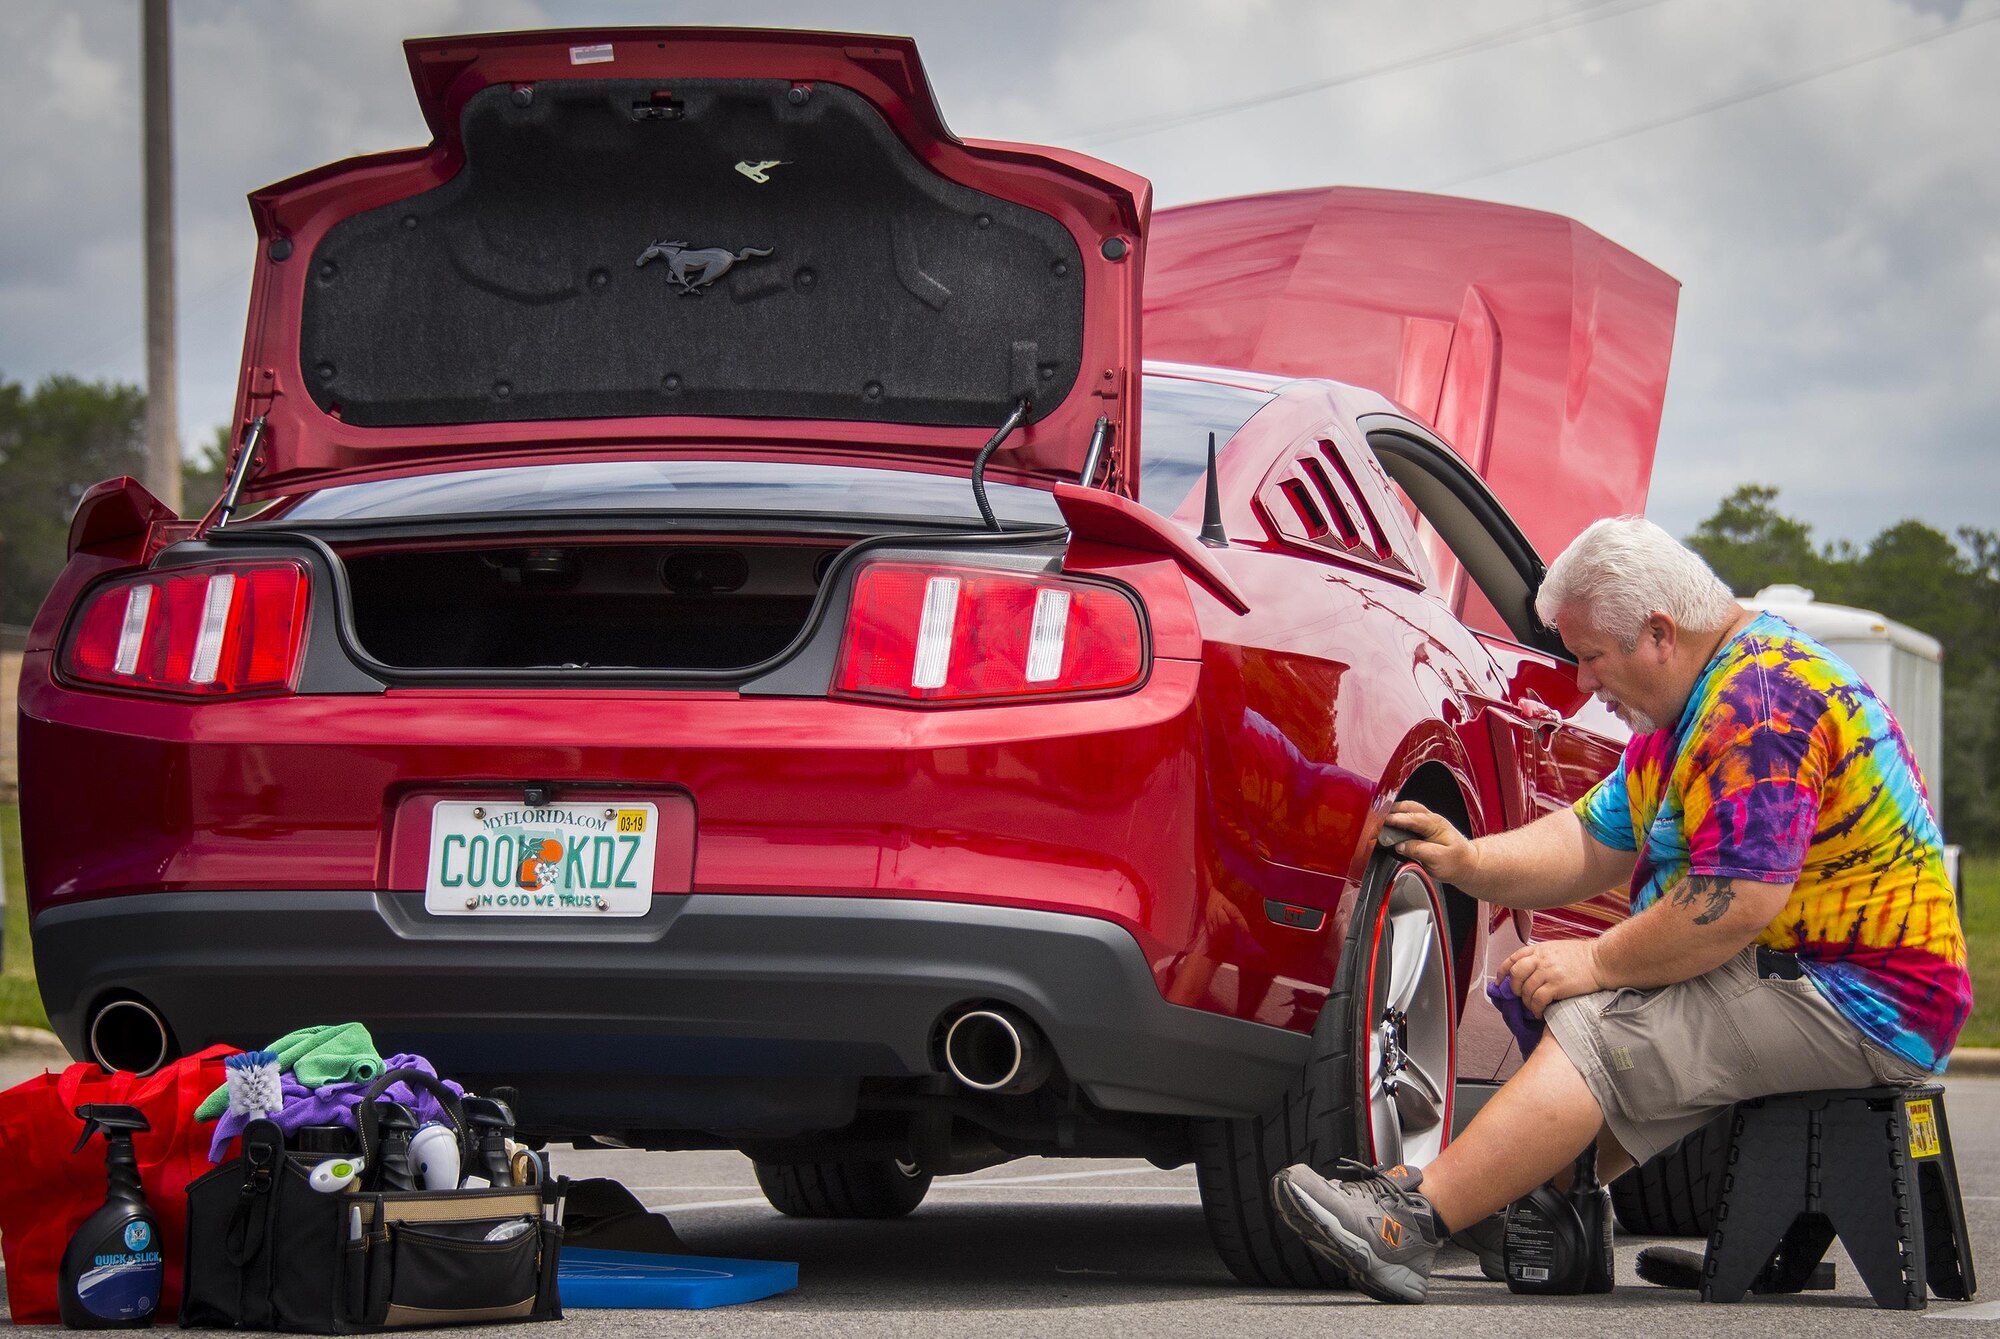 A Mustang owner ensures his tire are clean and shiny during the Eglin Connects event at Eglin Air Force Base, Fla., June 2.  The event to help promote resiliency featured information booths, sporting events and a car show.  (U.S. Air Force photo/Samuel King Jr.)